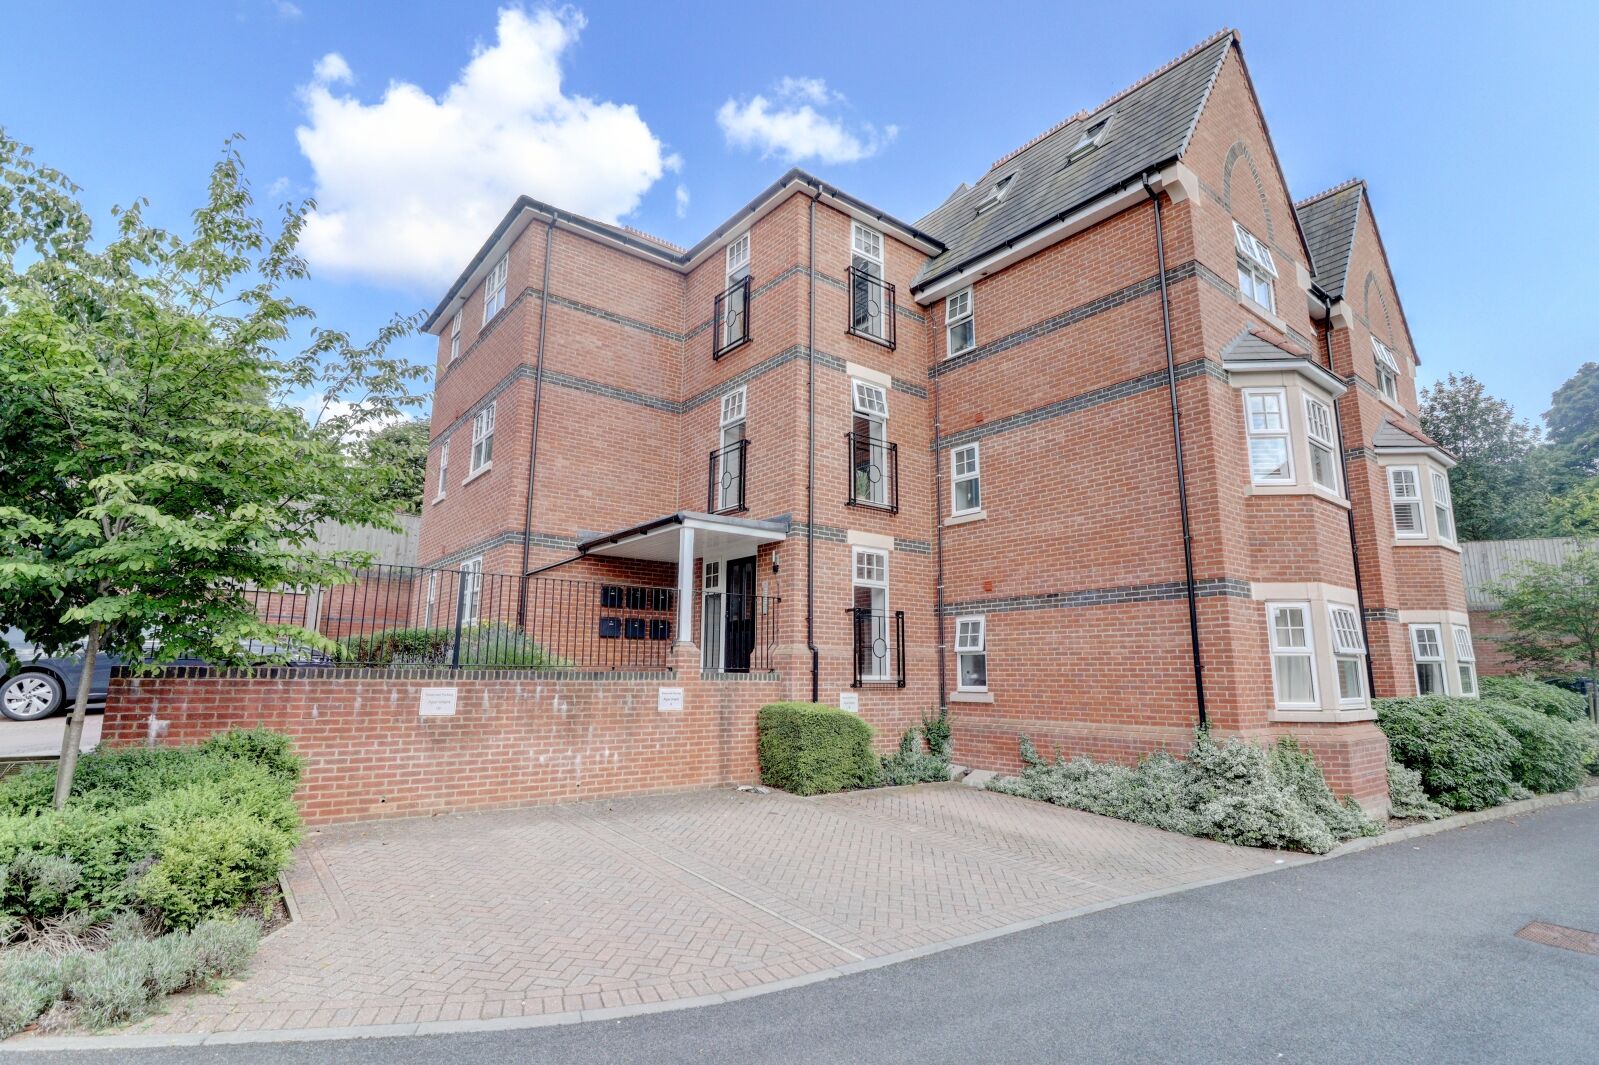 2 bedroom  flat for sale Fair Acre, High Wycombe, HP13, main image